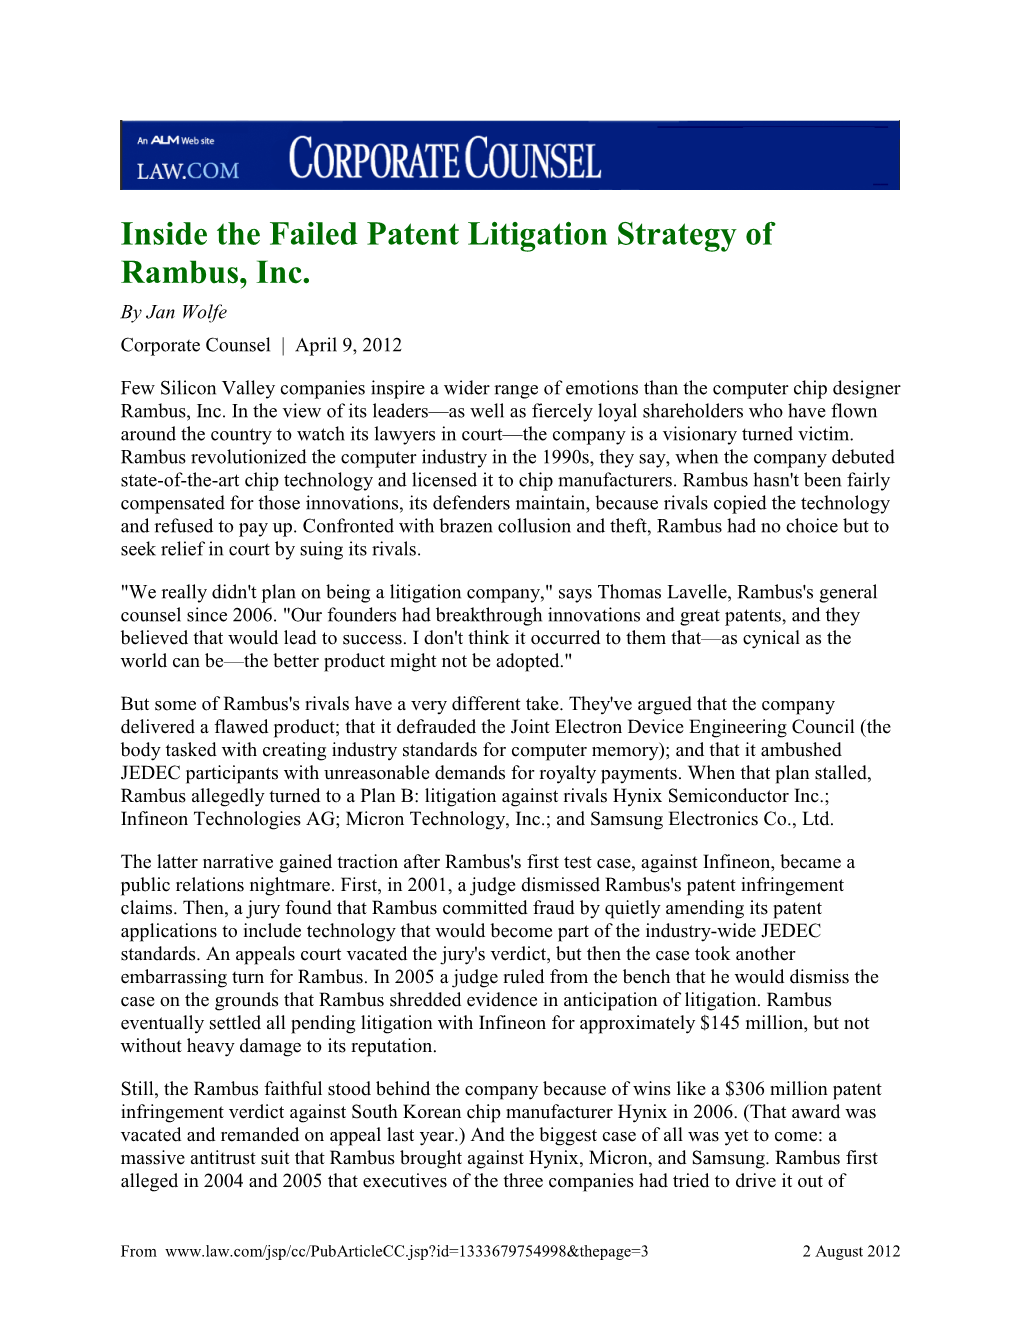 Inside the Failed Patent Litigation Strategy of Rambus, Inc. by Jan Wolfe Corporate Counsel | April 9, 2012